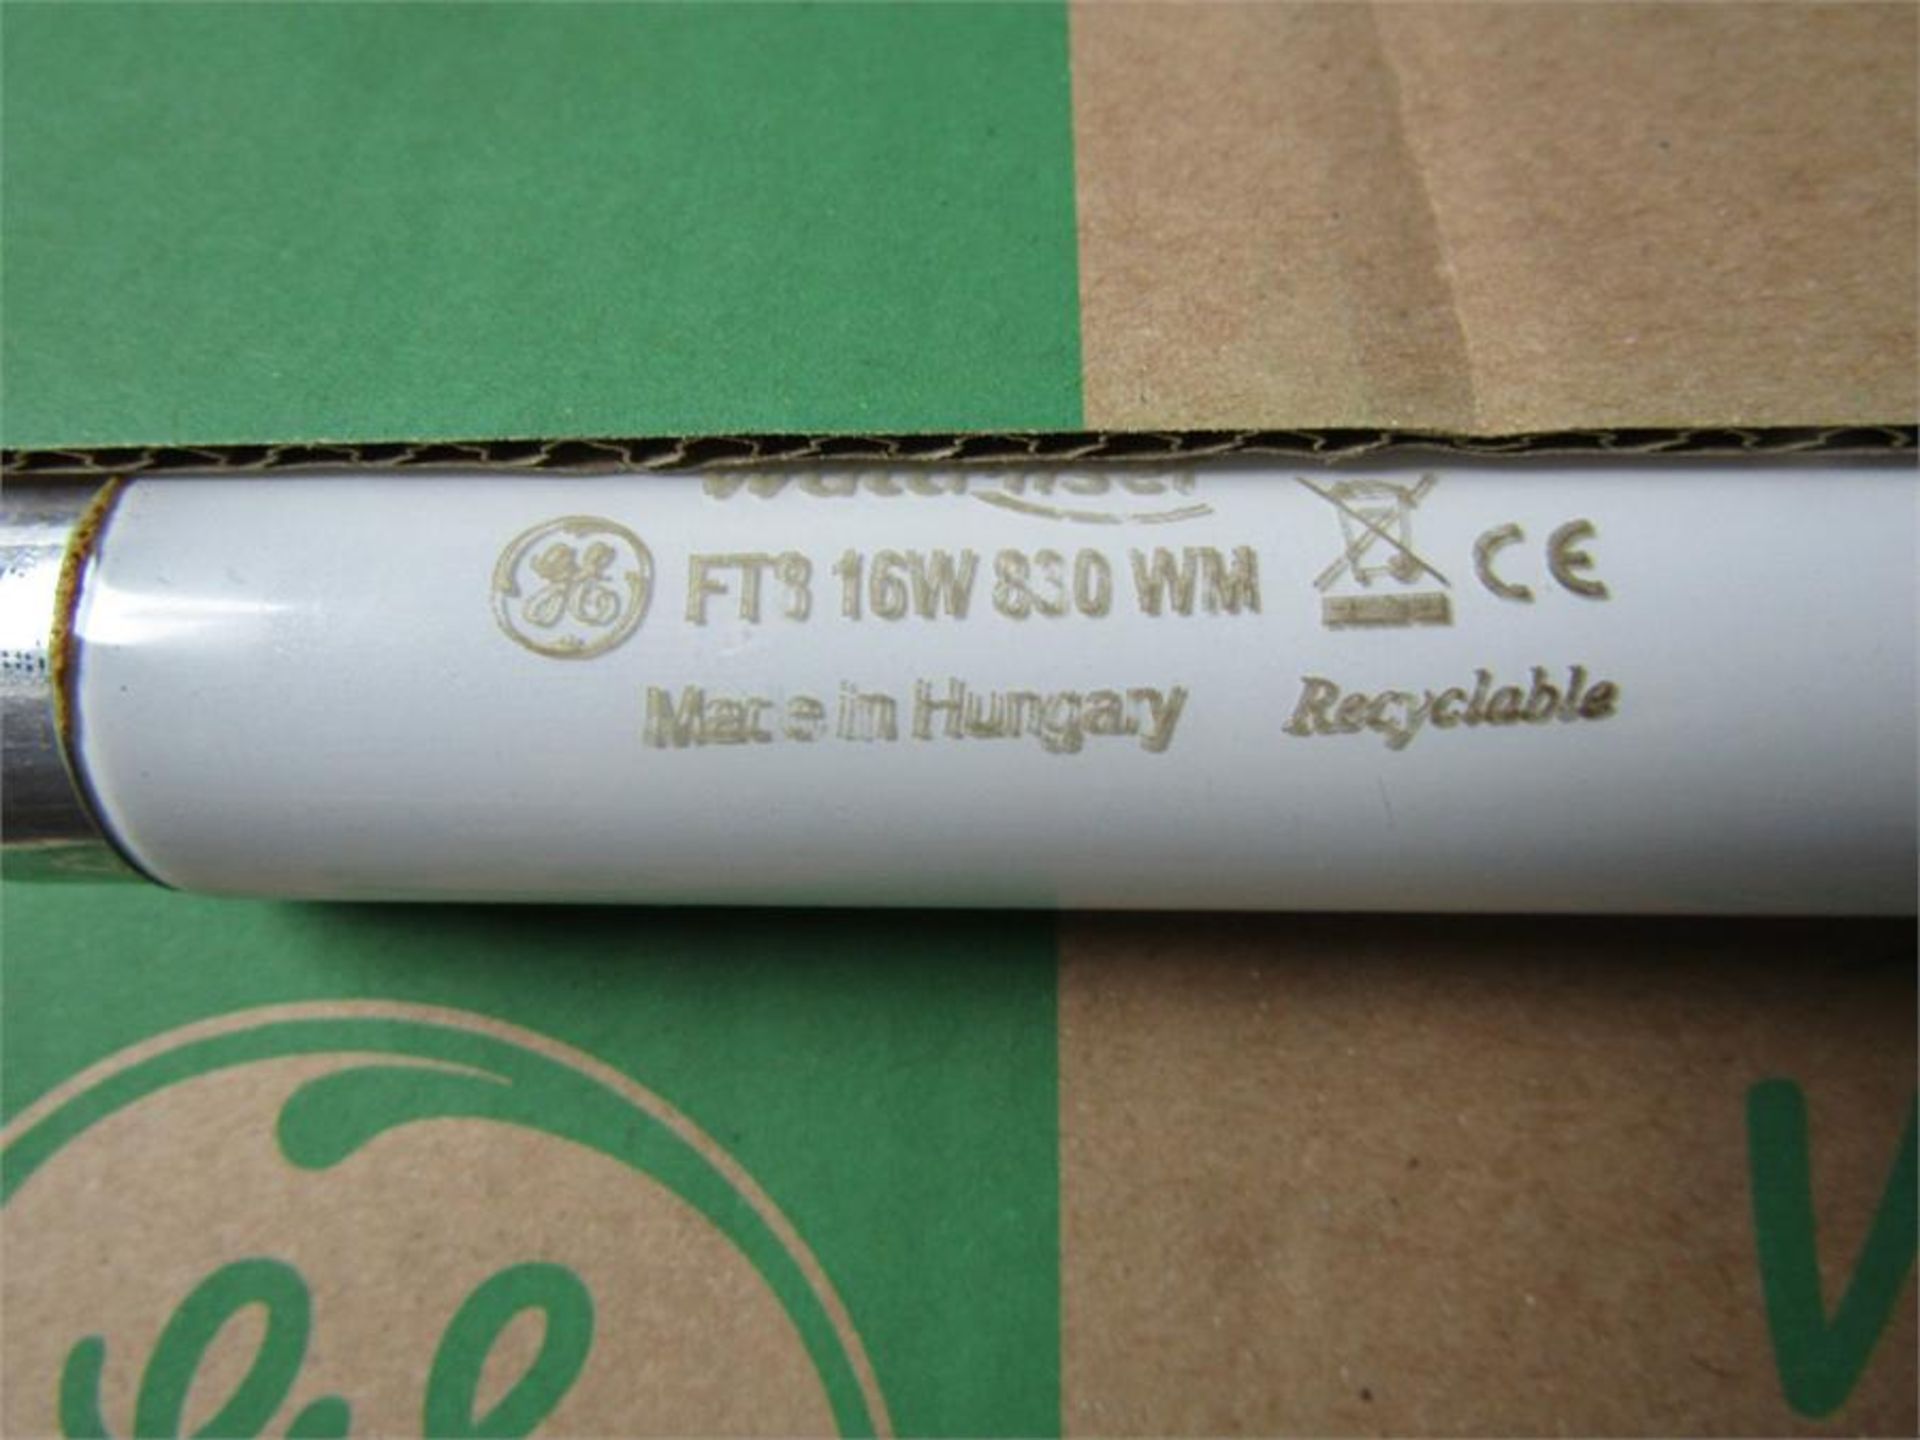 Pack of 25 x GE 16W T8 Linear Fluorescent Tubes